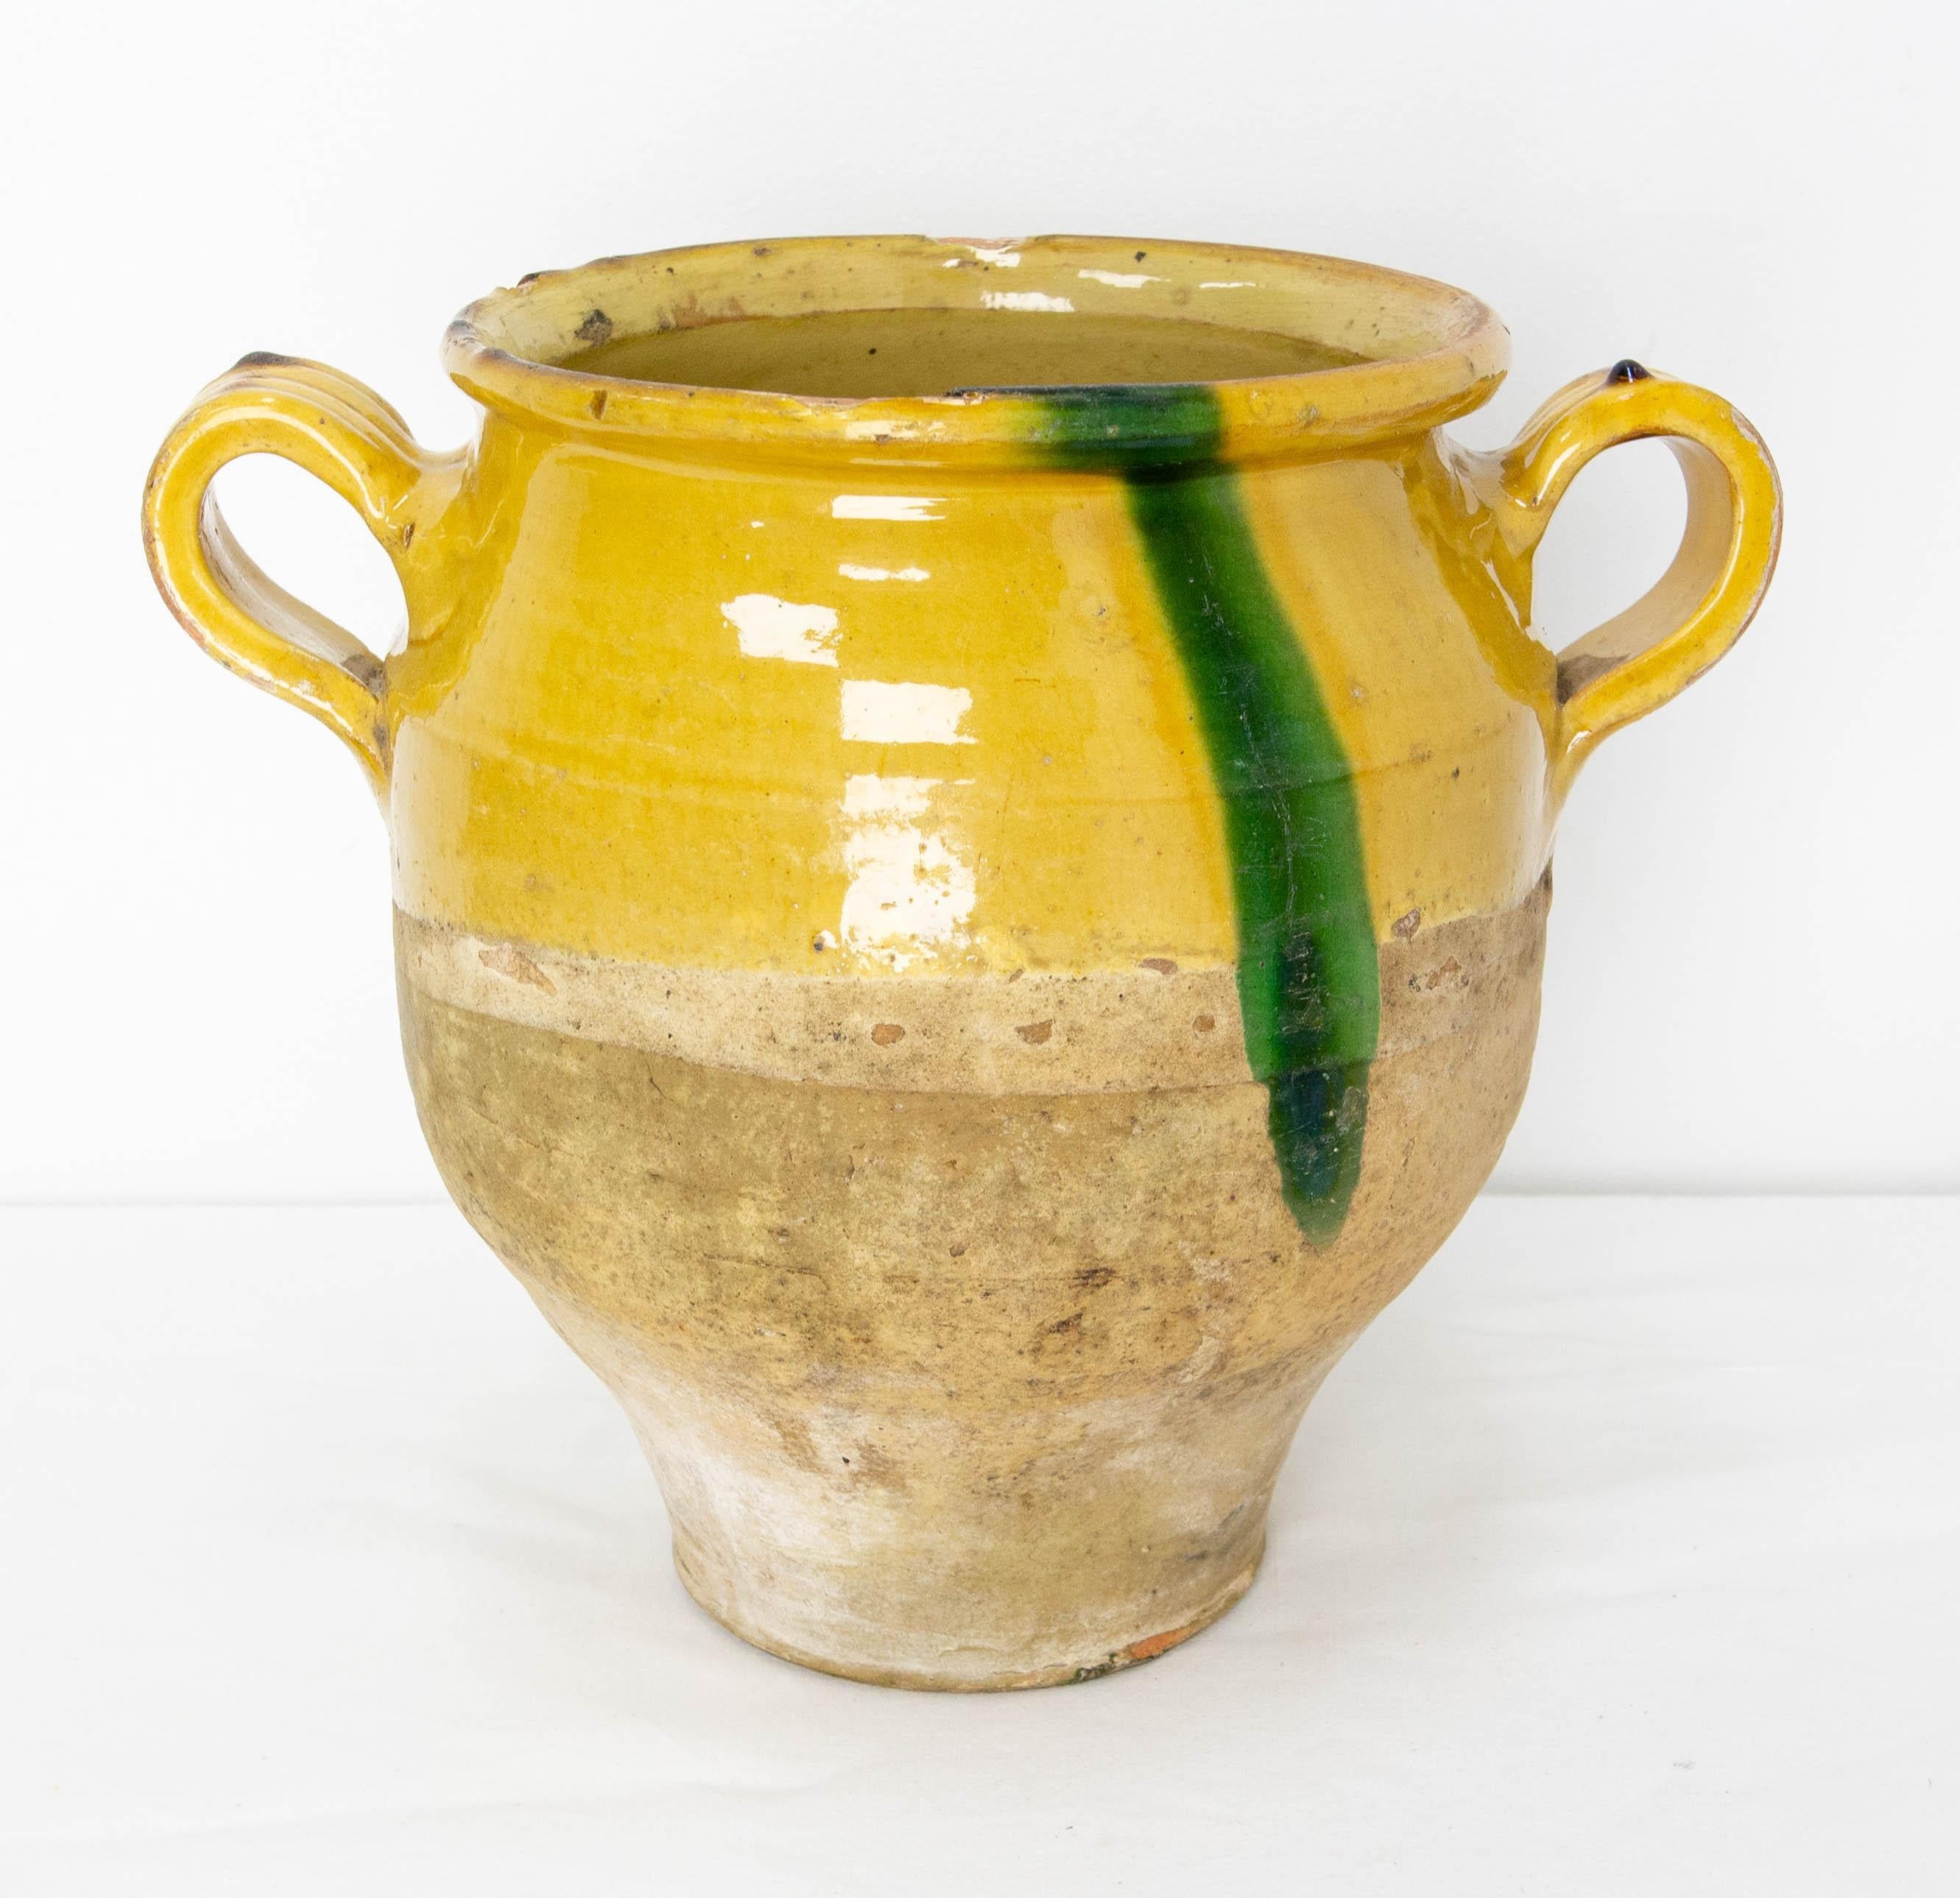 French terracotta confit pot.
Traditional large earthenware pottery confit pot from South West France with yellow glaze.
This vessel was used from the 19th to the mid-20th century to conserve food.
Very decorative.
Good patina and bright yellow